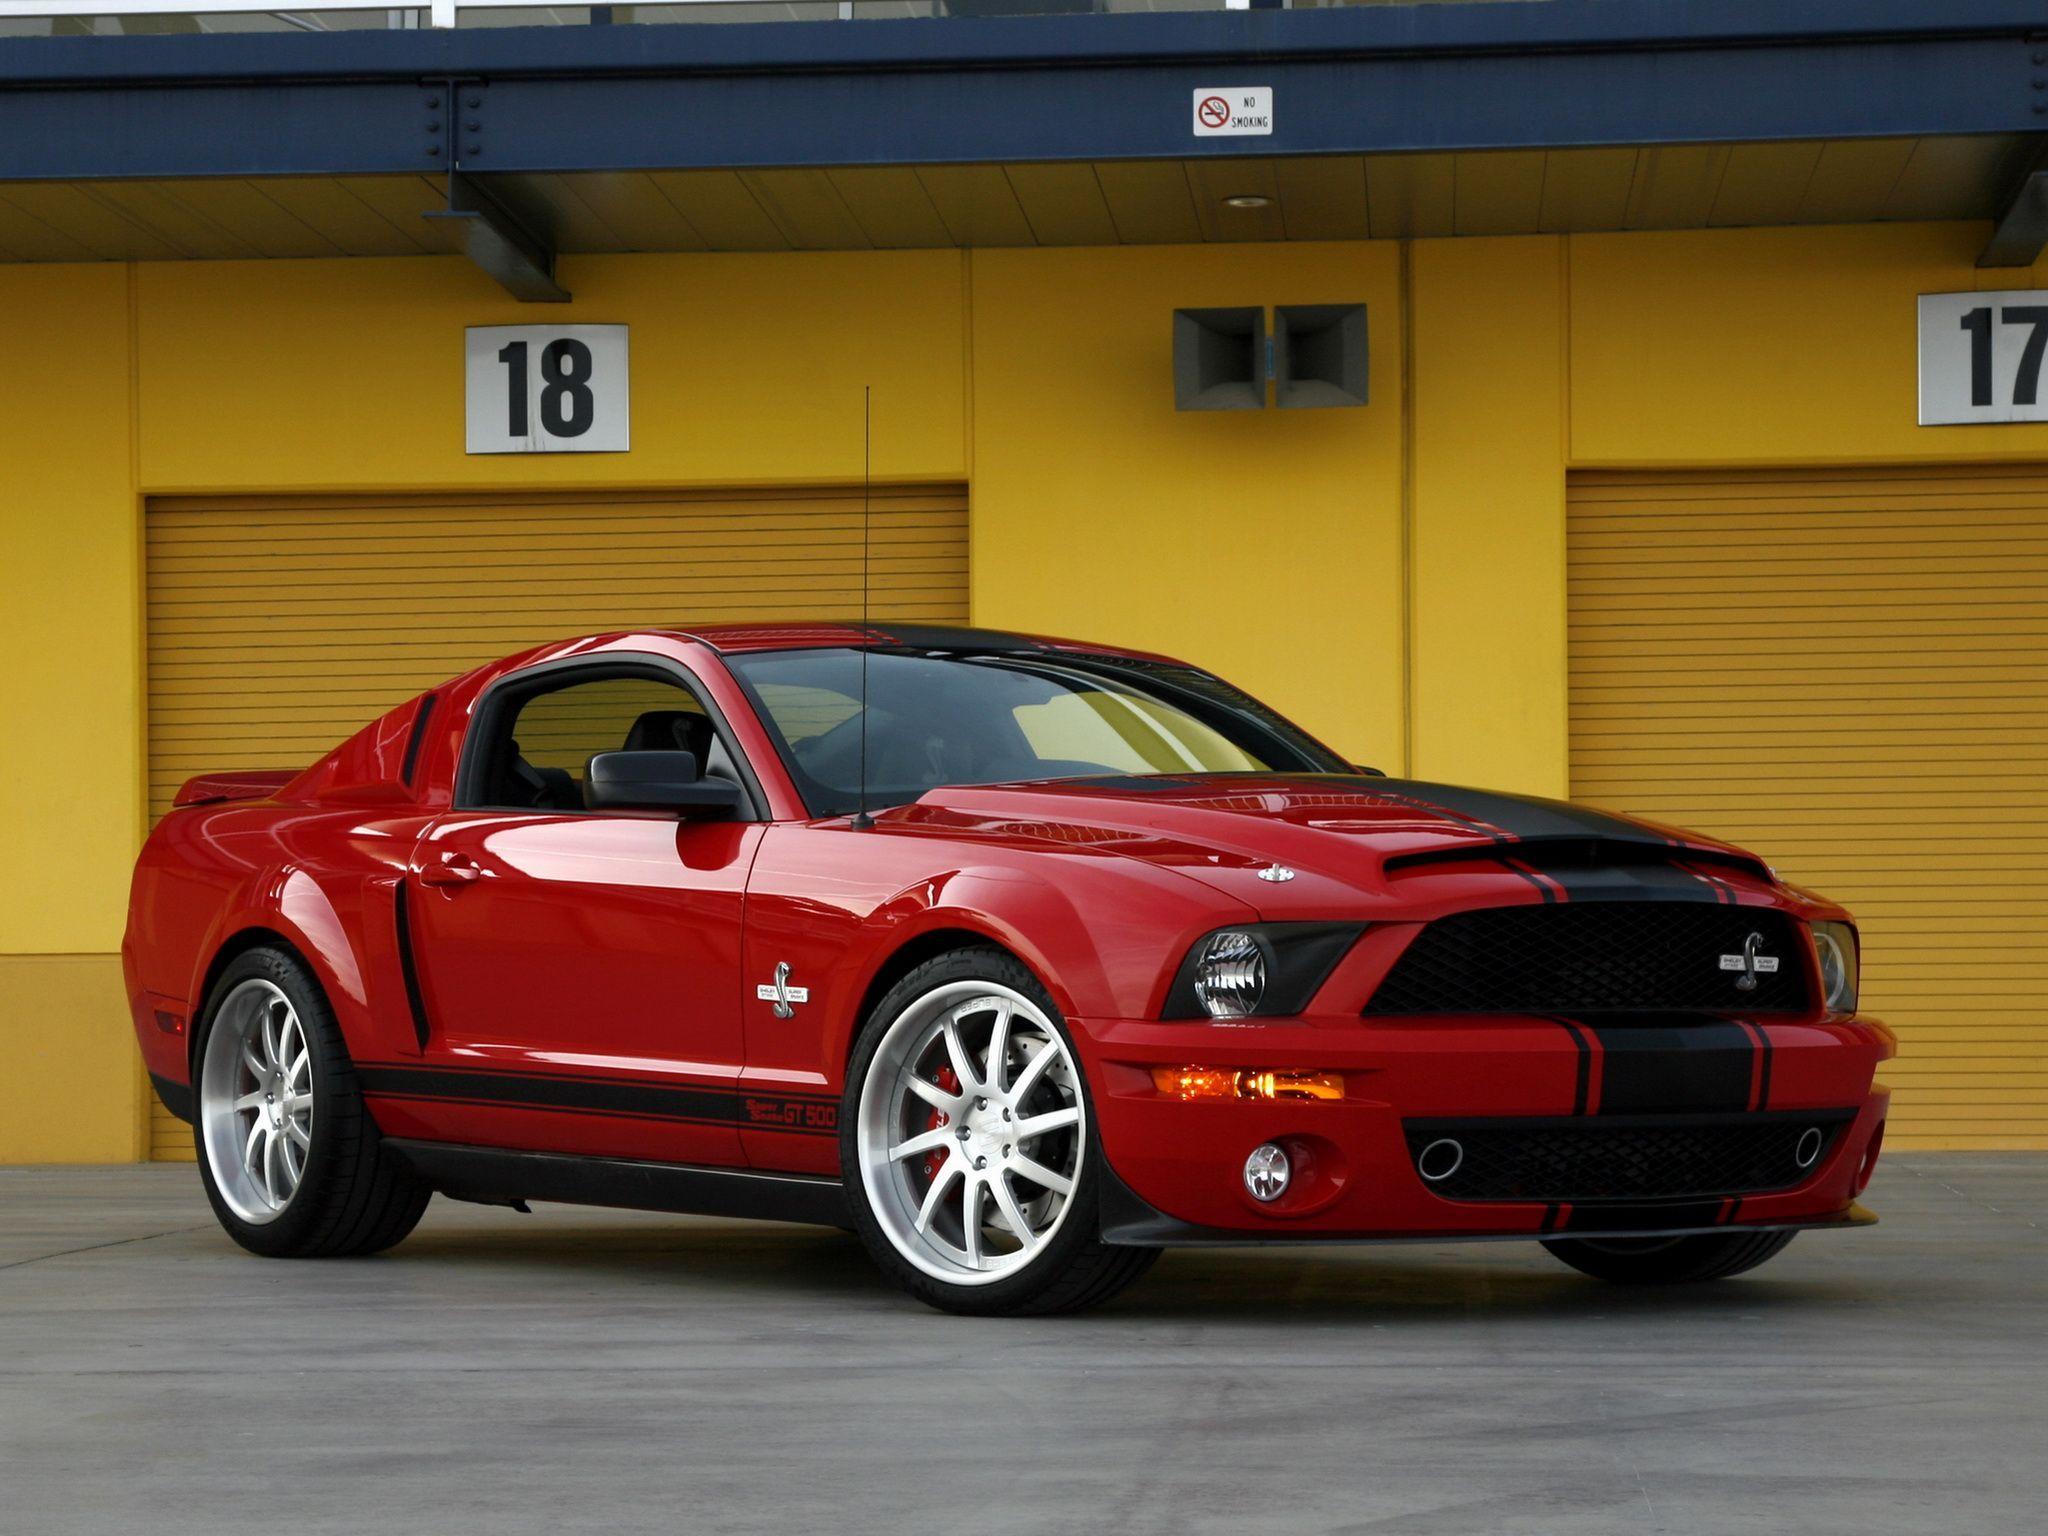 Ford Mustang Shelby GT500 Super Snake, ford mustang super